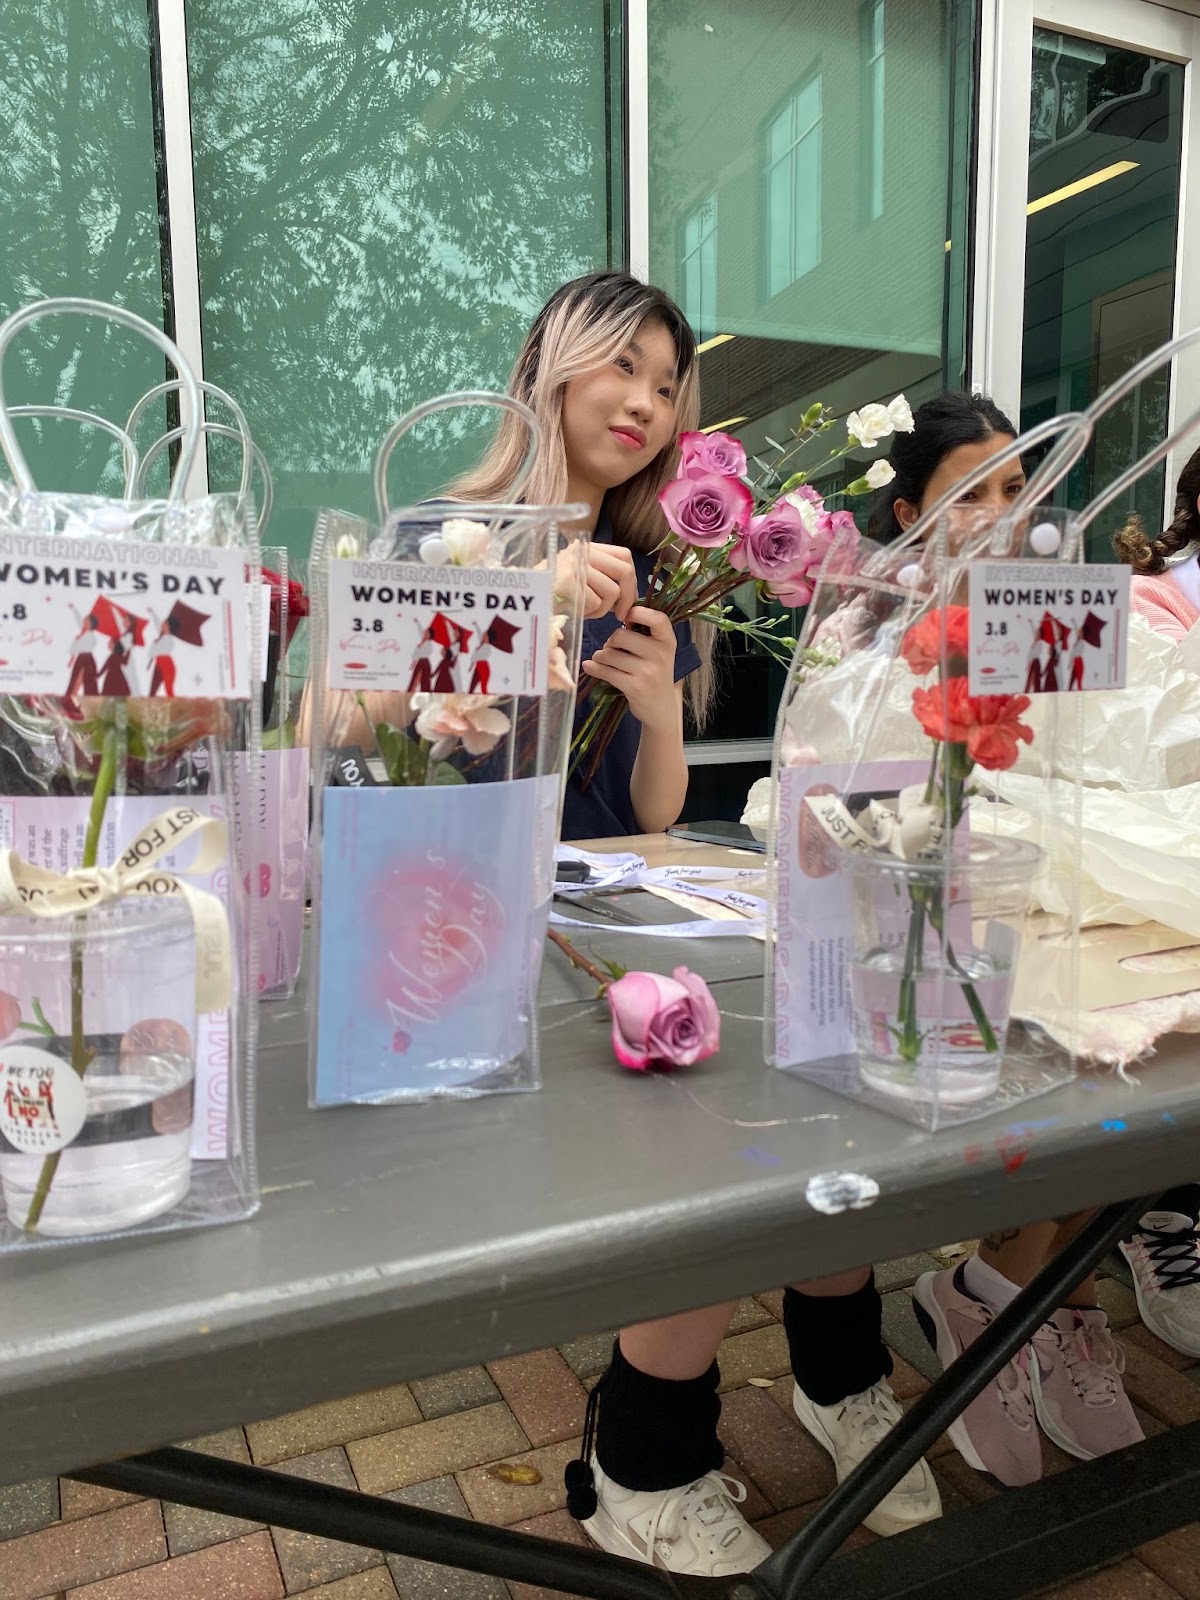 Lily Zhang (11), president of the #MeToo Feminism Club at The Village School hosting a flower sale for Women’s Day. Picture taken by Marlen Gómez. 